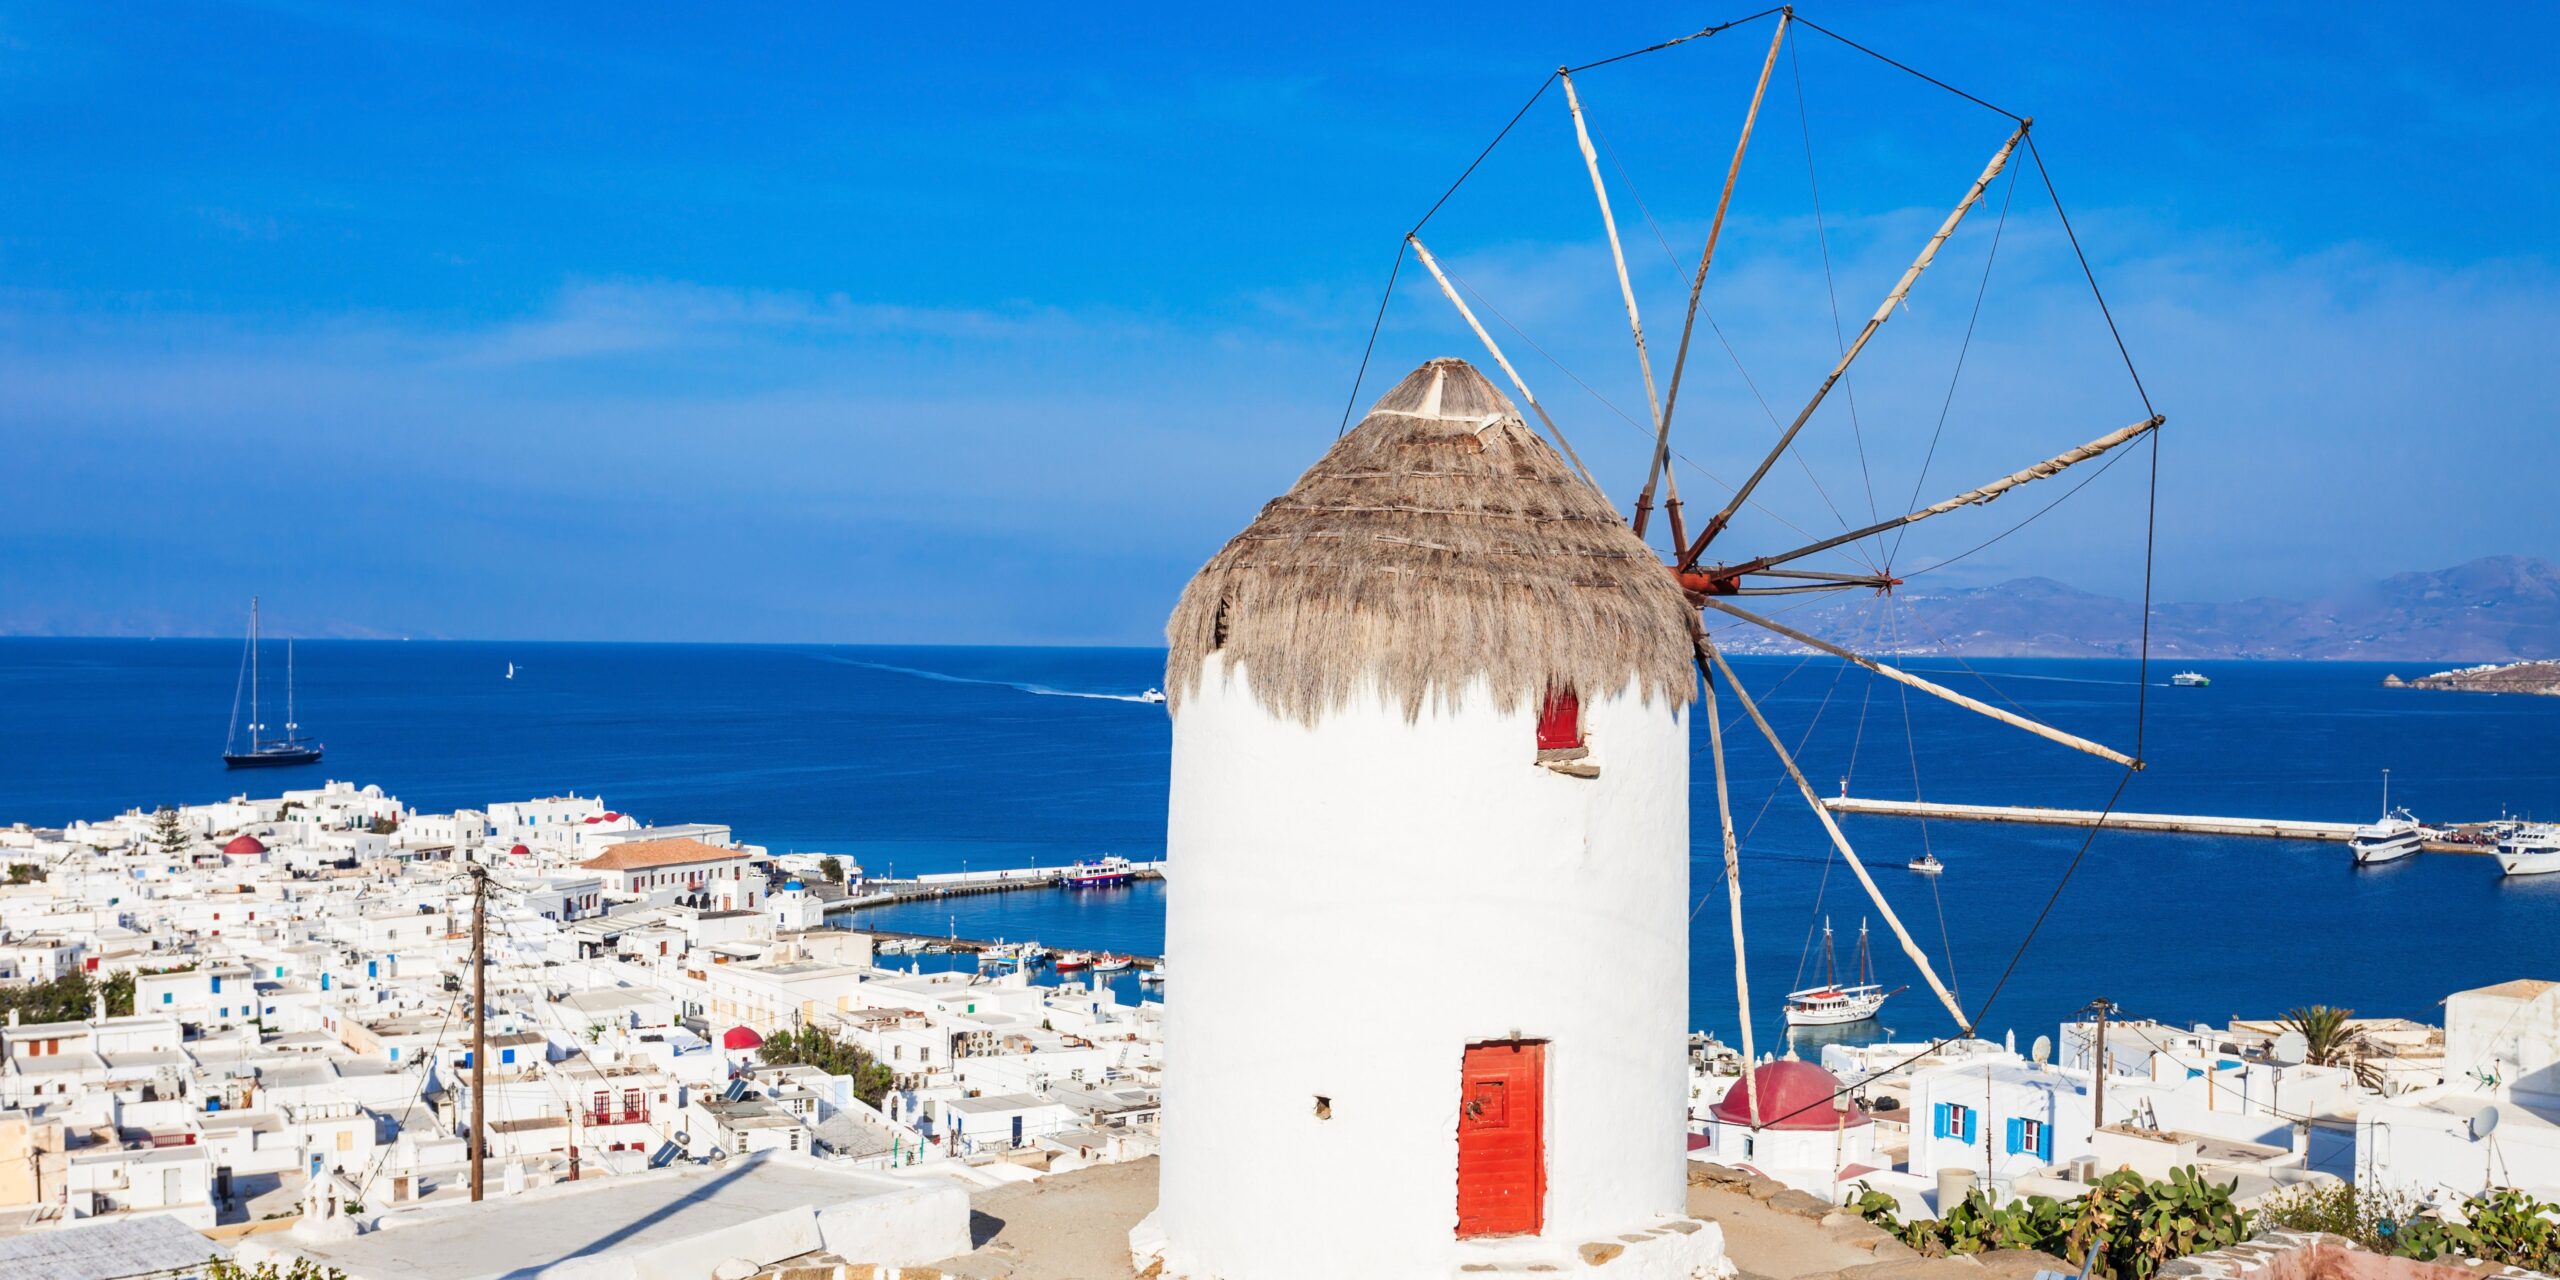 A traditional windmill overlooks the white buildings of Mykonos, with the blue sea stretching out to the horizon.